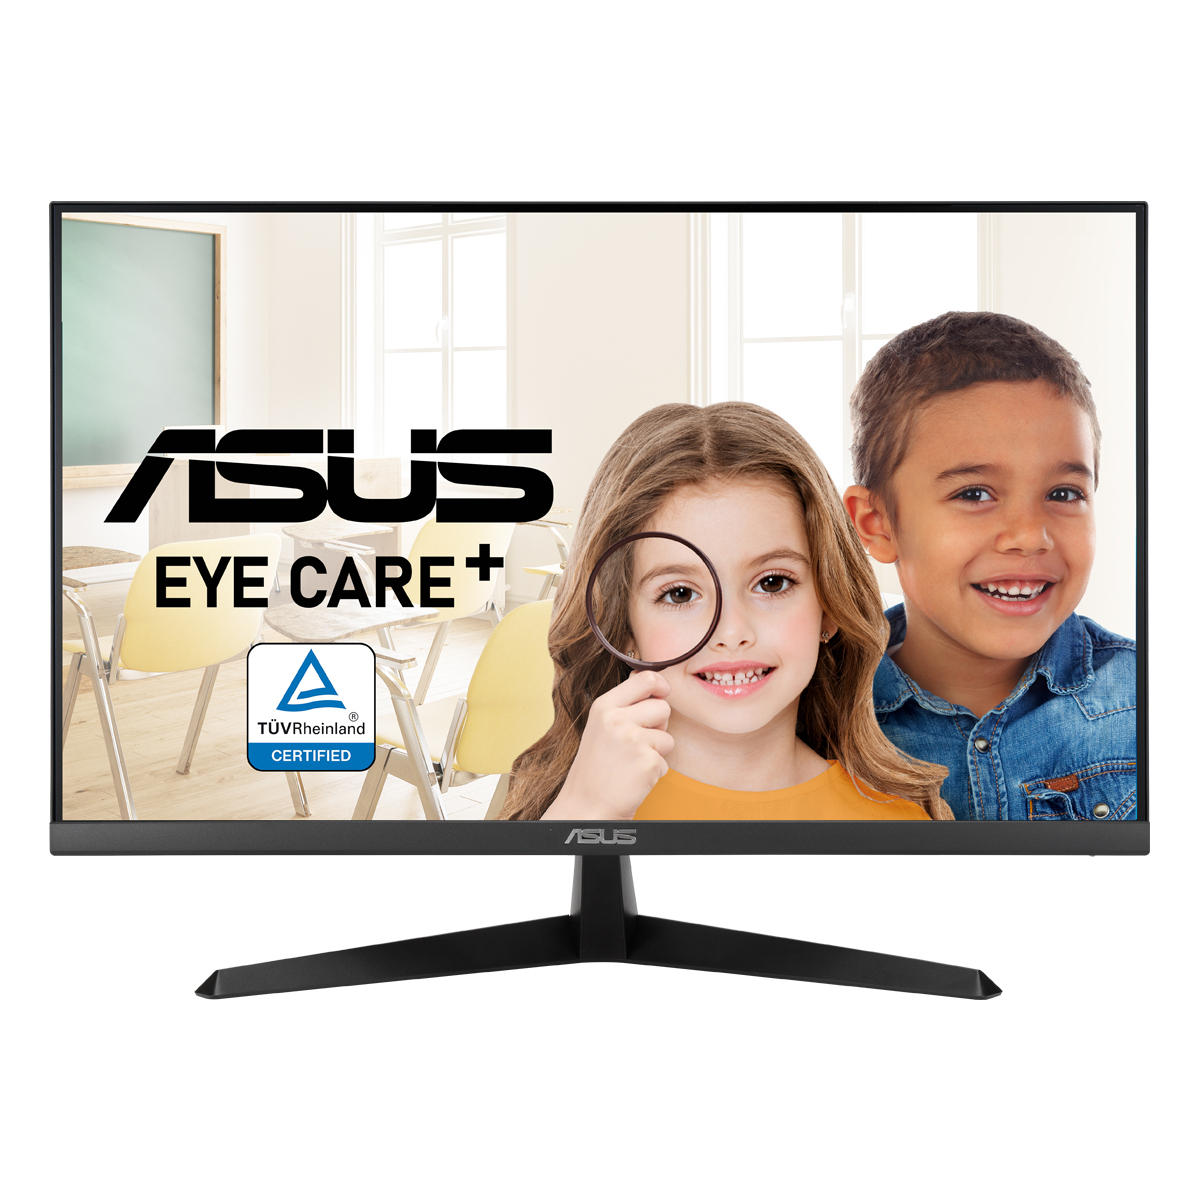 ASUS VY279HE - 60,45cm (23,8 Zoll), LED, IPS, Full-HD, FreeSync, 75Hz, 1ms, HDMI, VGA von Asus